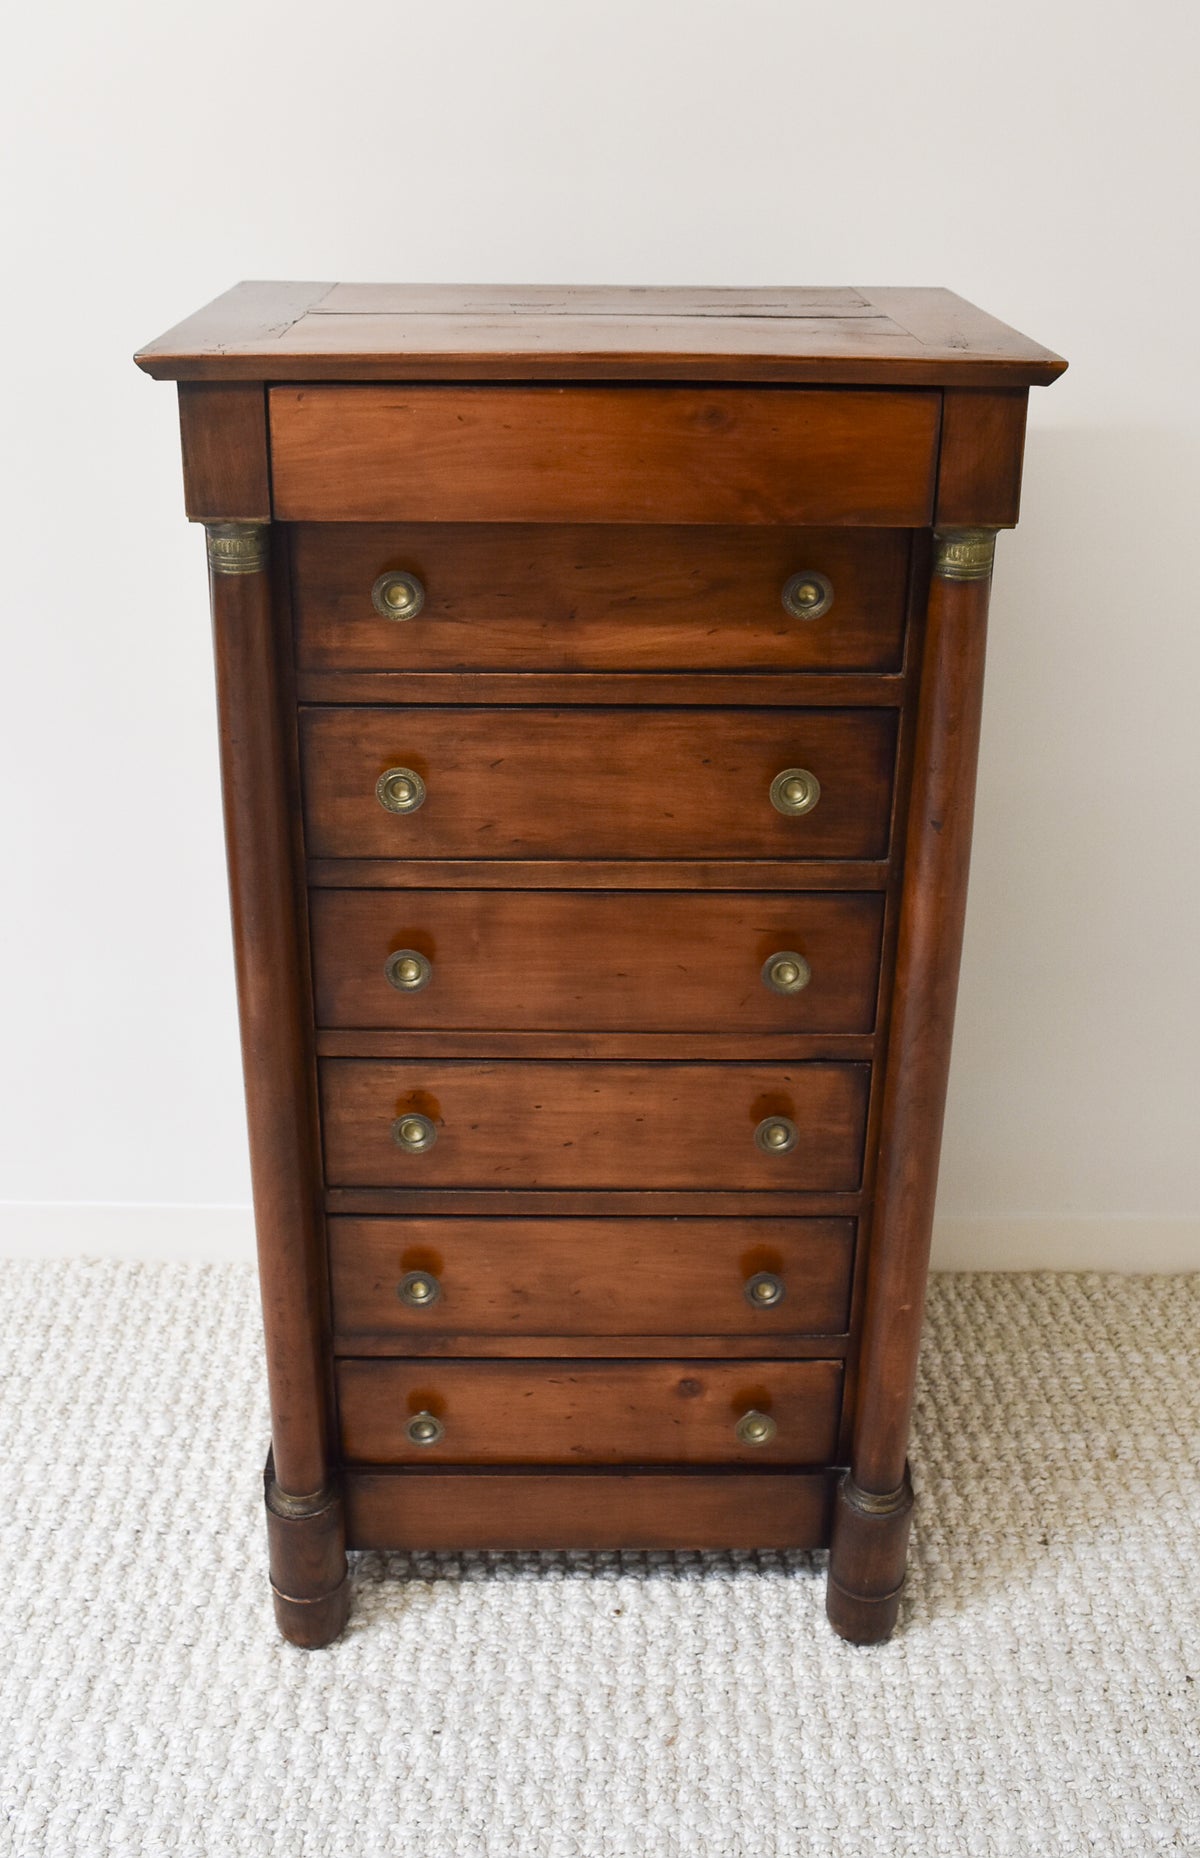 French Walnut Empire Style Lingerie Chest or Semainier with Bronze Fittings